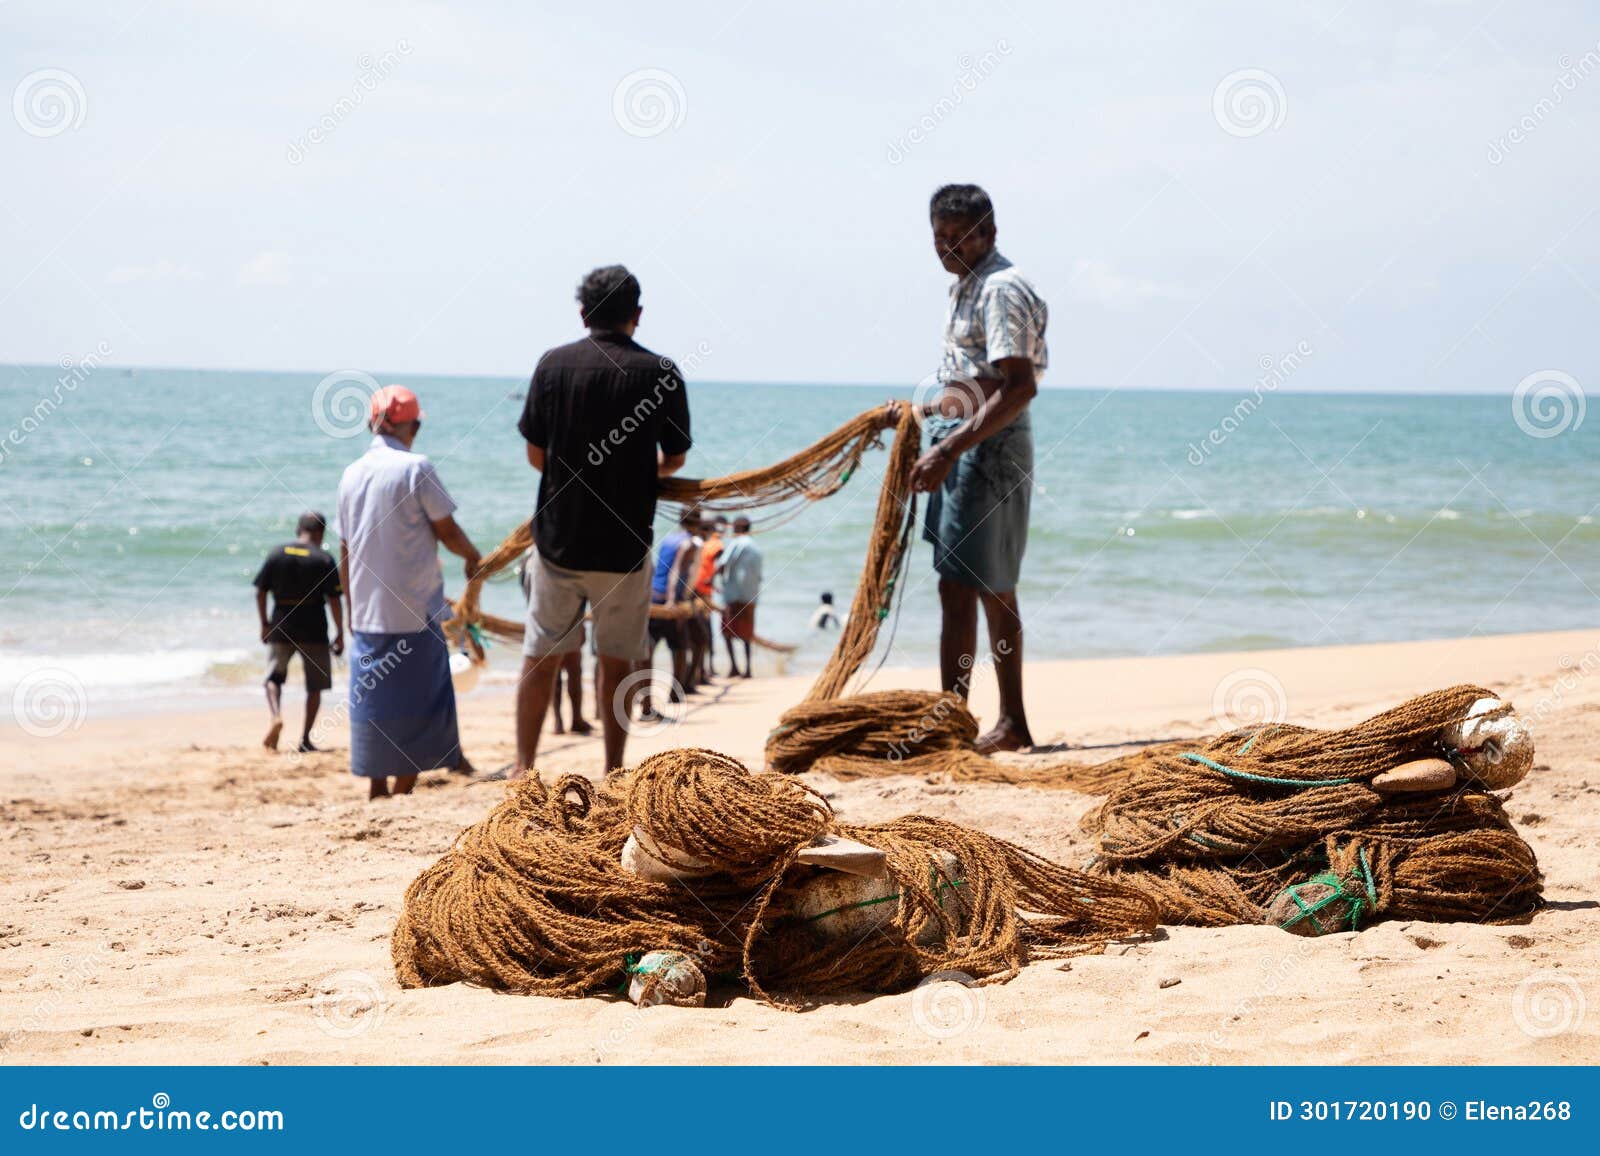 https://thumbs.dreamstime.com/z/fishermen-pull-over-large-fishing-net-unawatuna-sri-lanka-february-group-men-summer-clothes-different-colors-helping-to-301720190.jpg